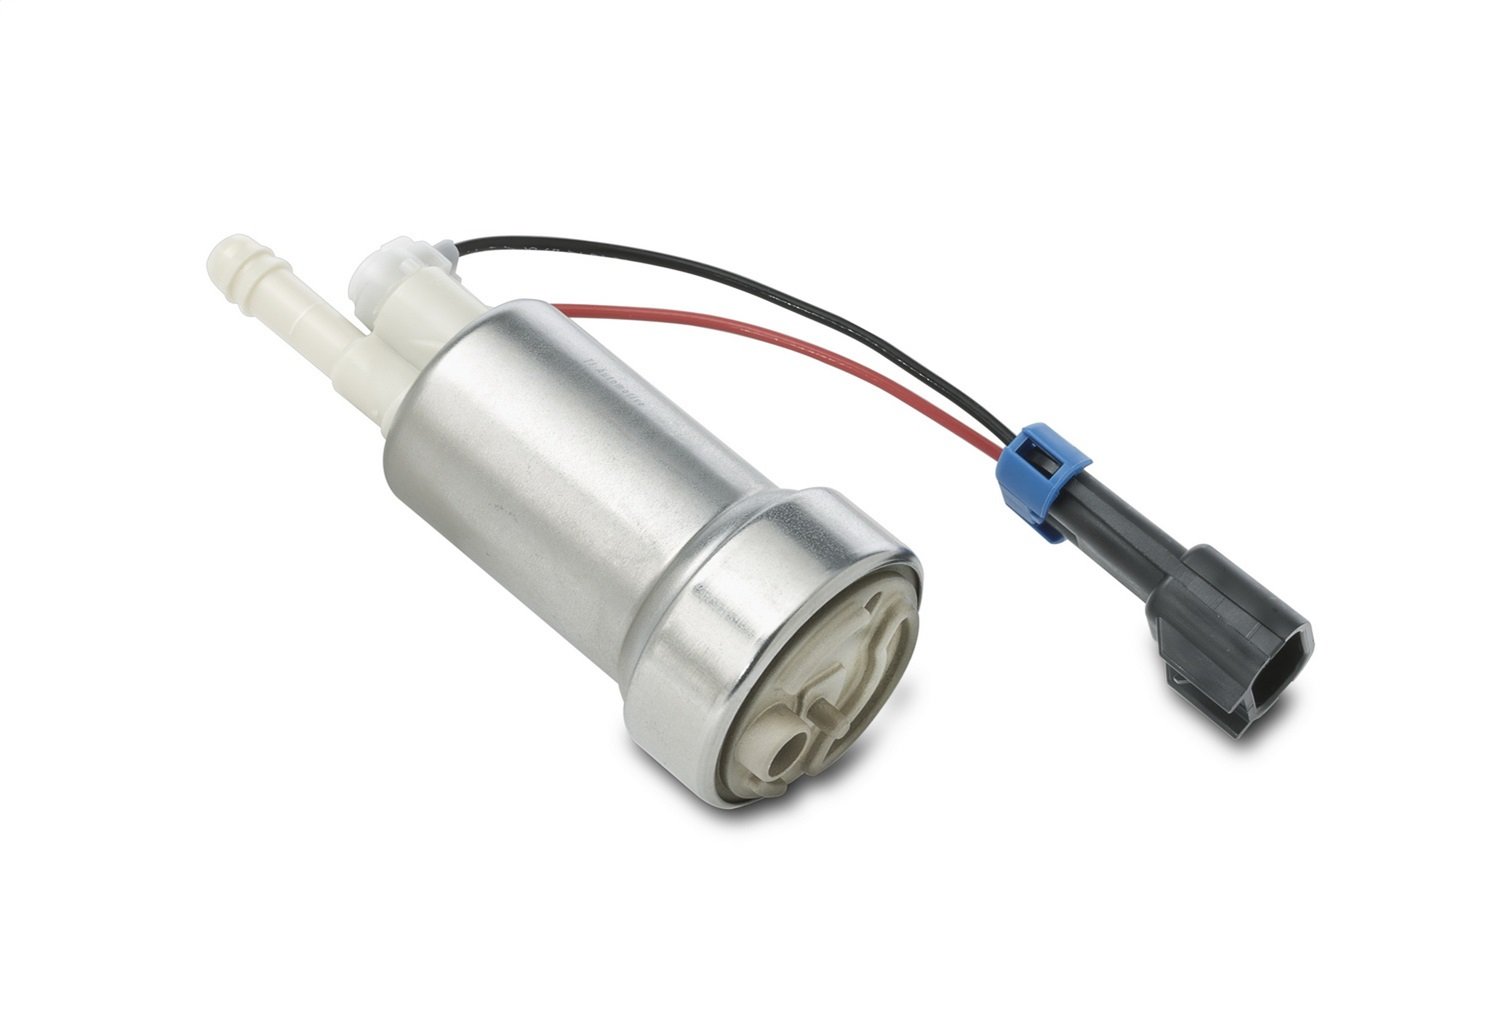 Universal In-Tank Electric Fuel Pump Flows 100 GPH at 40 psi